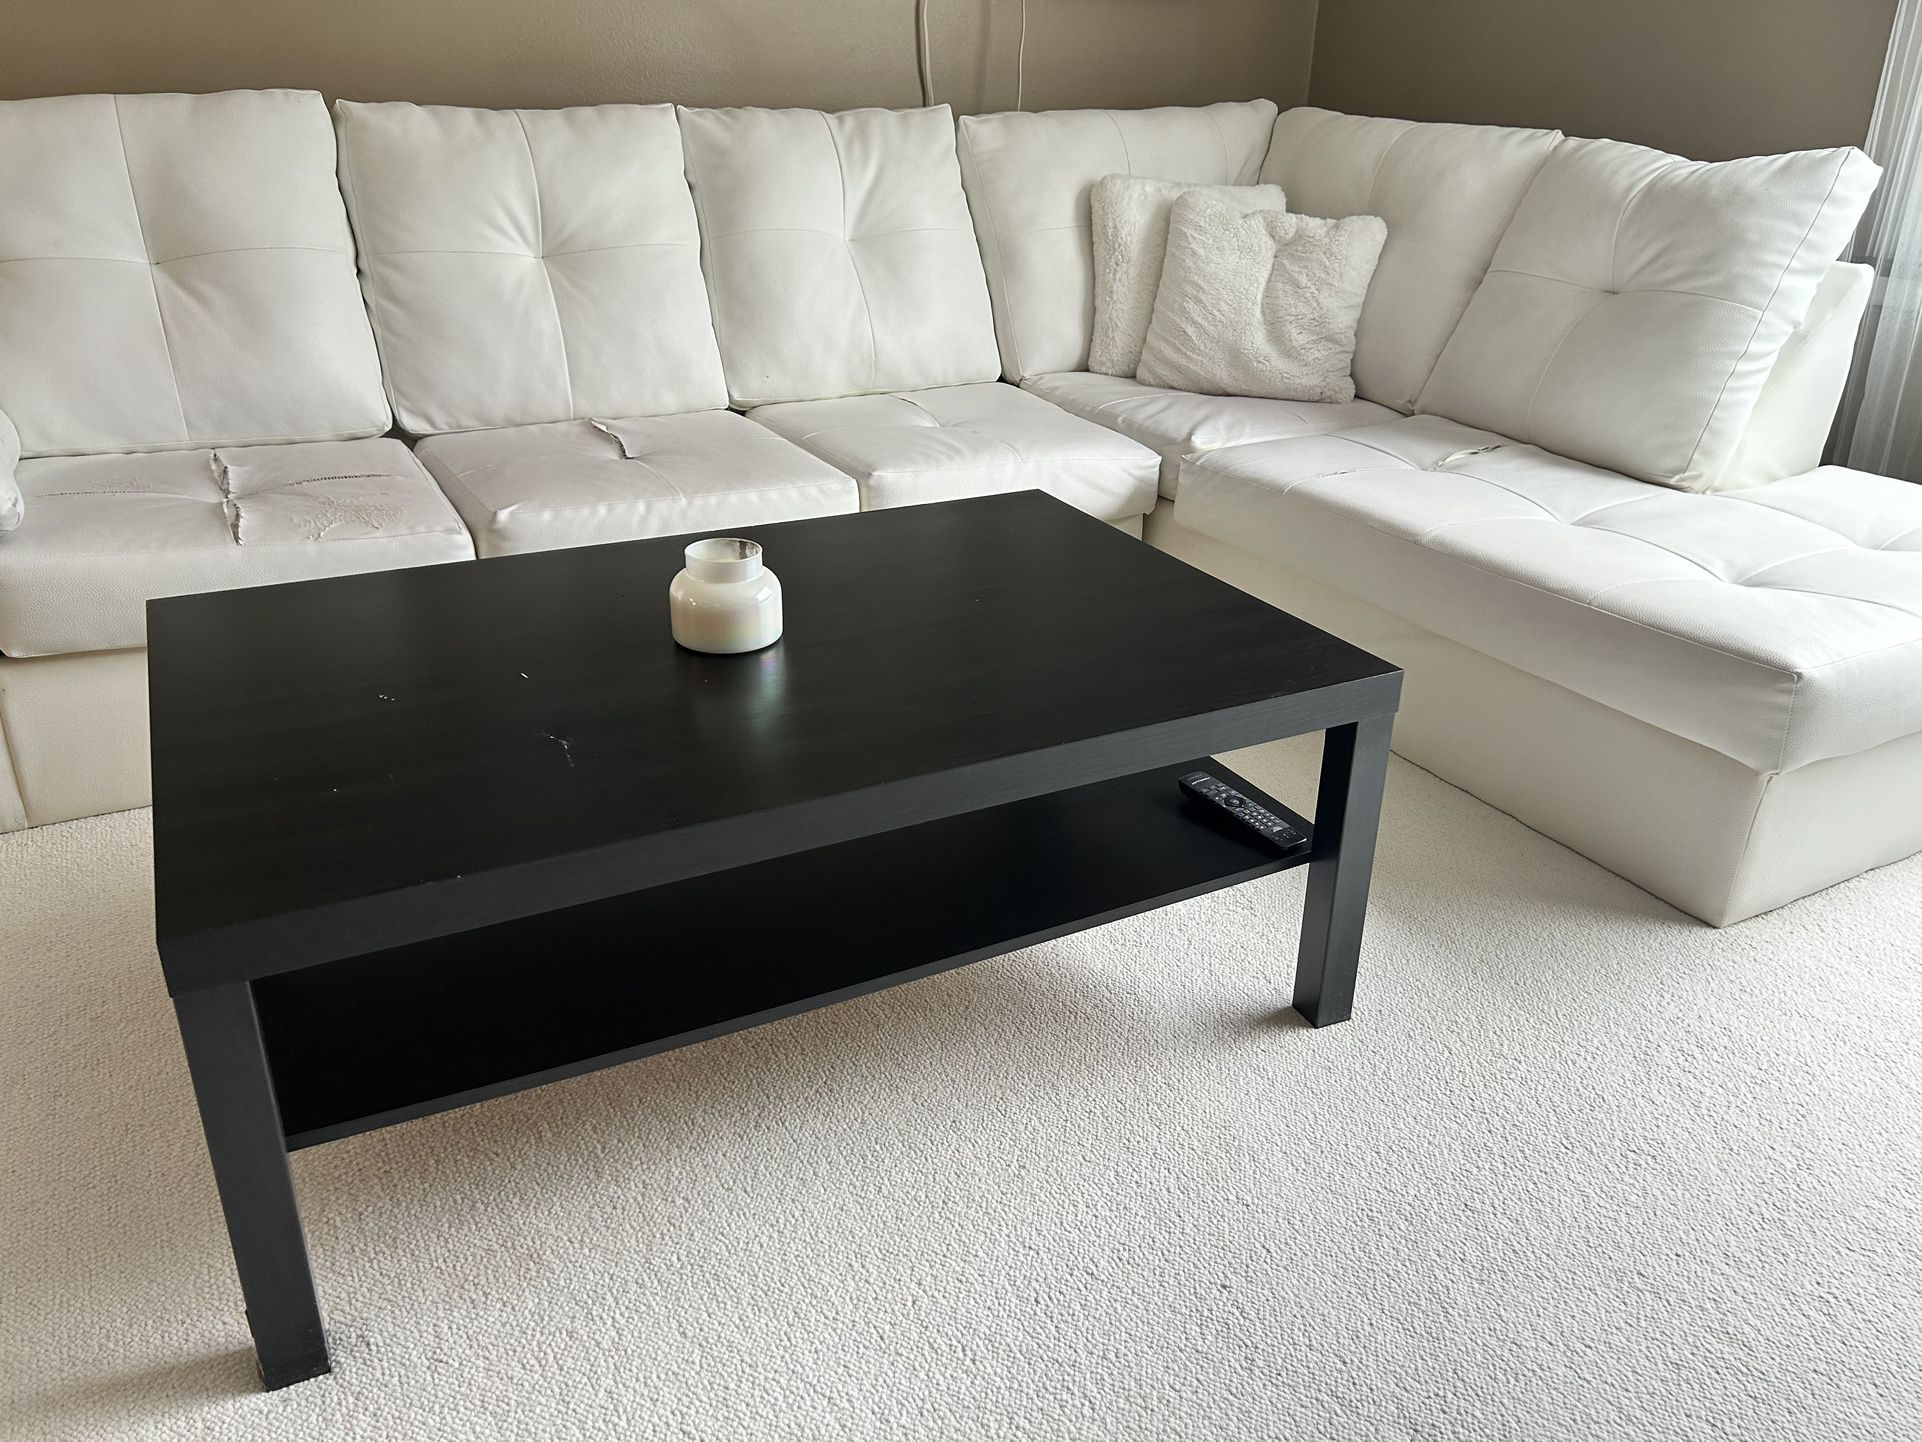 White sectional couch with black table